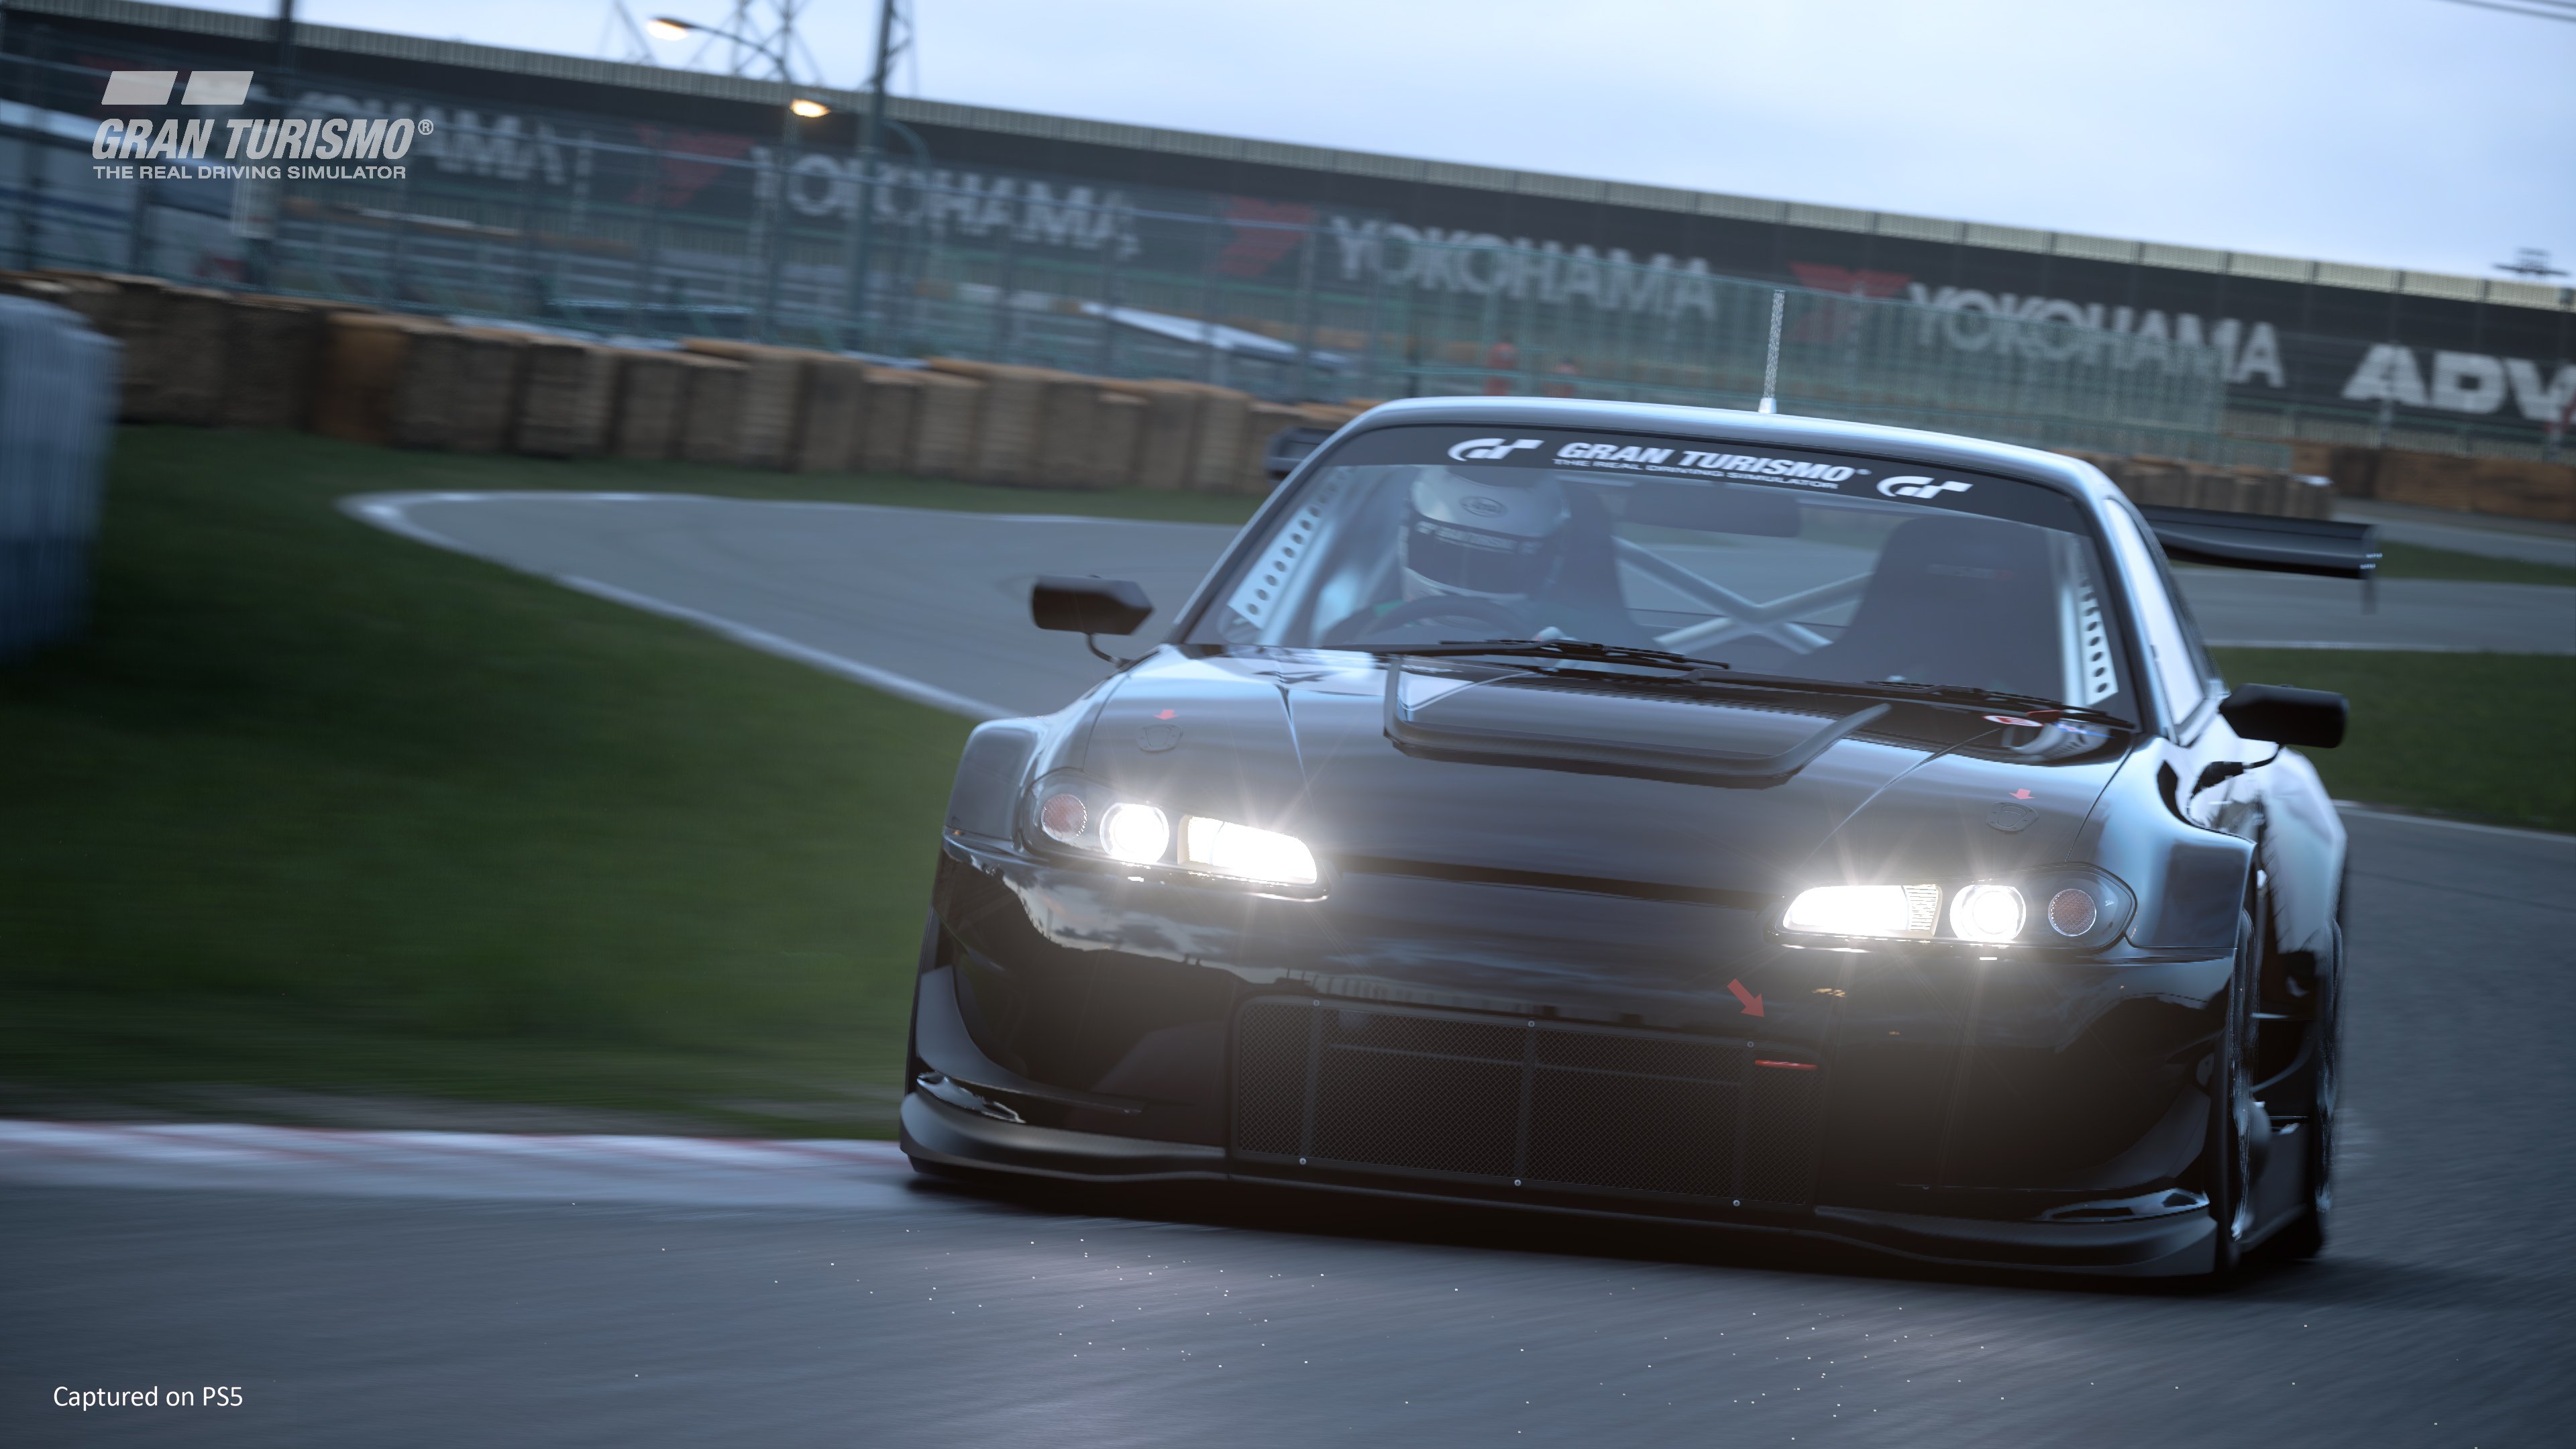 Gran Turismo 7 Review: a Dazzling Racing Experience on PS5 and PS4